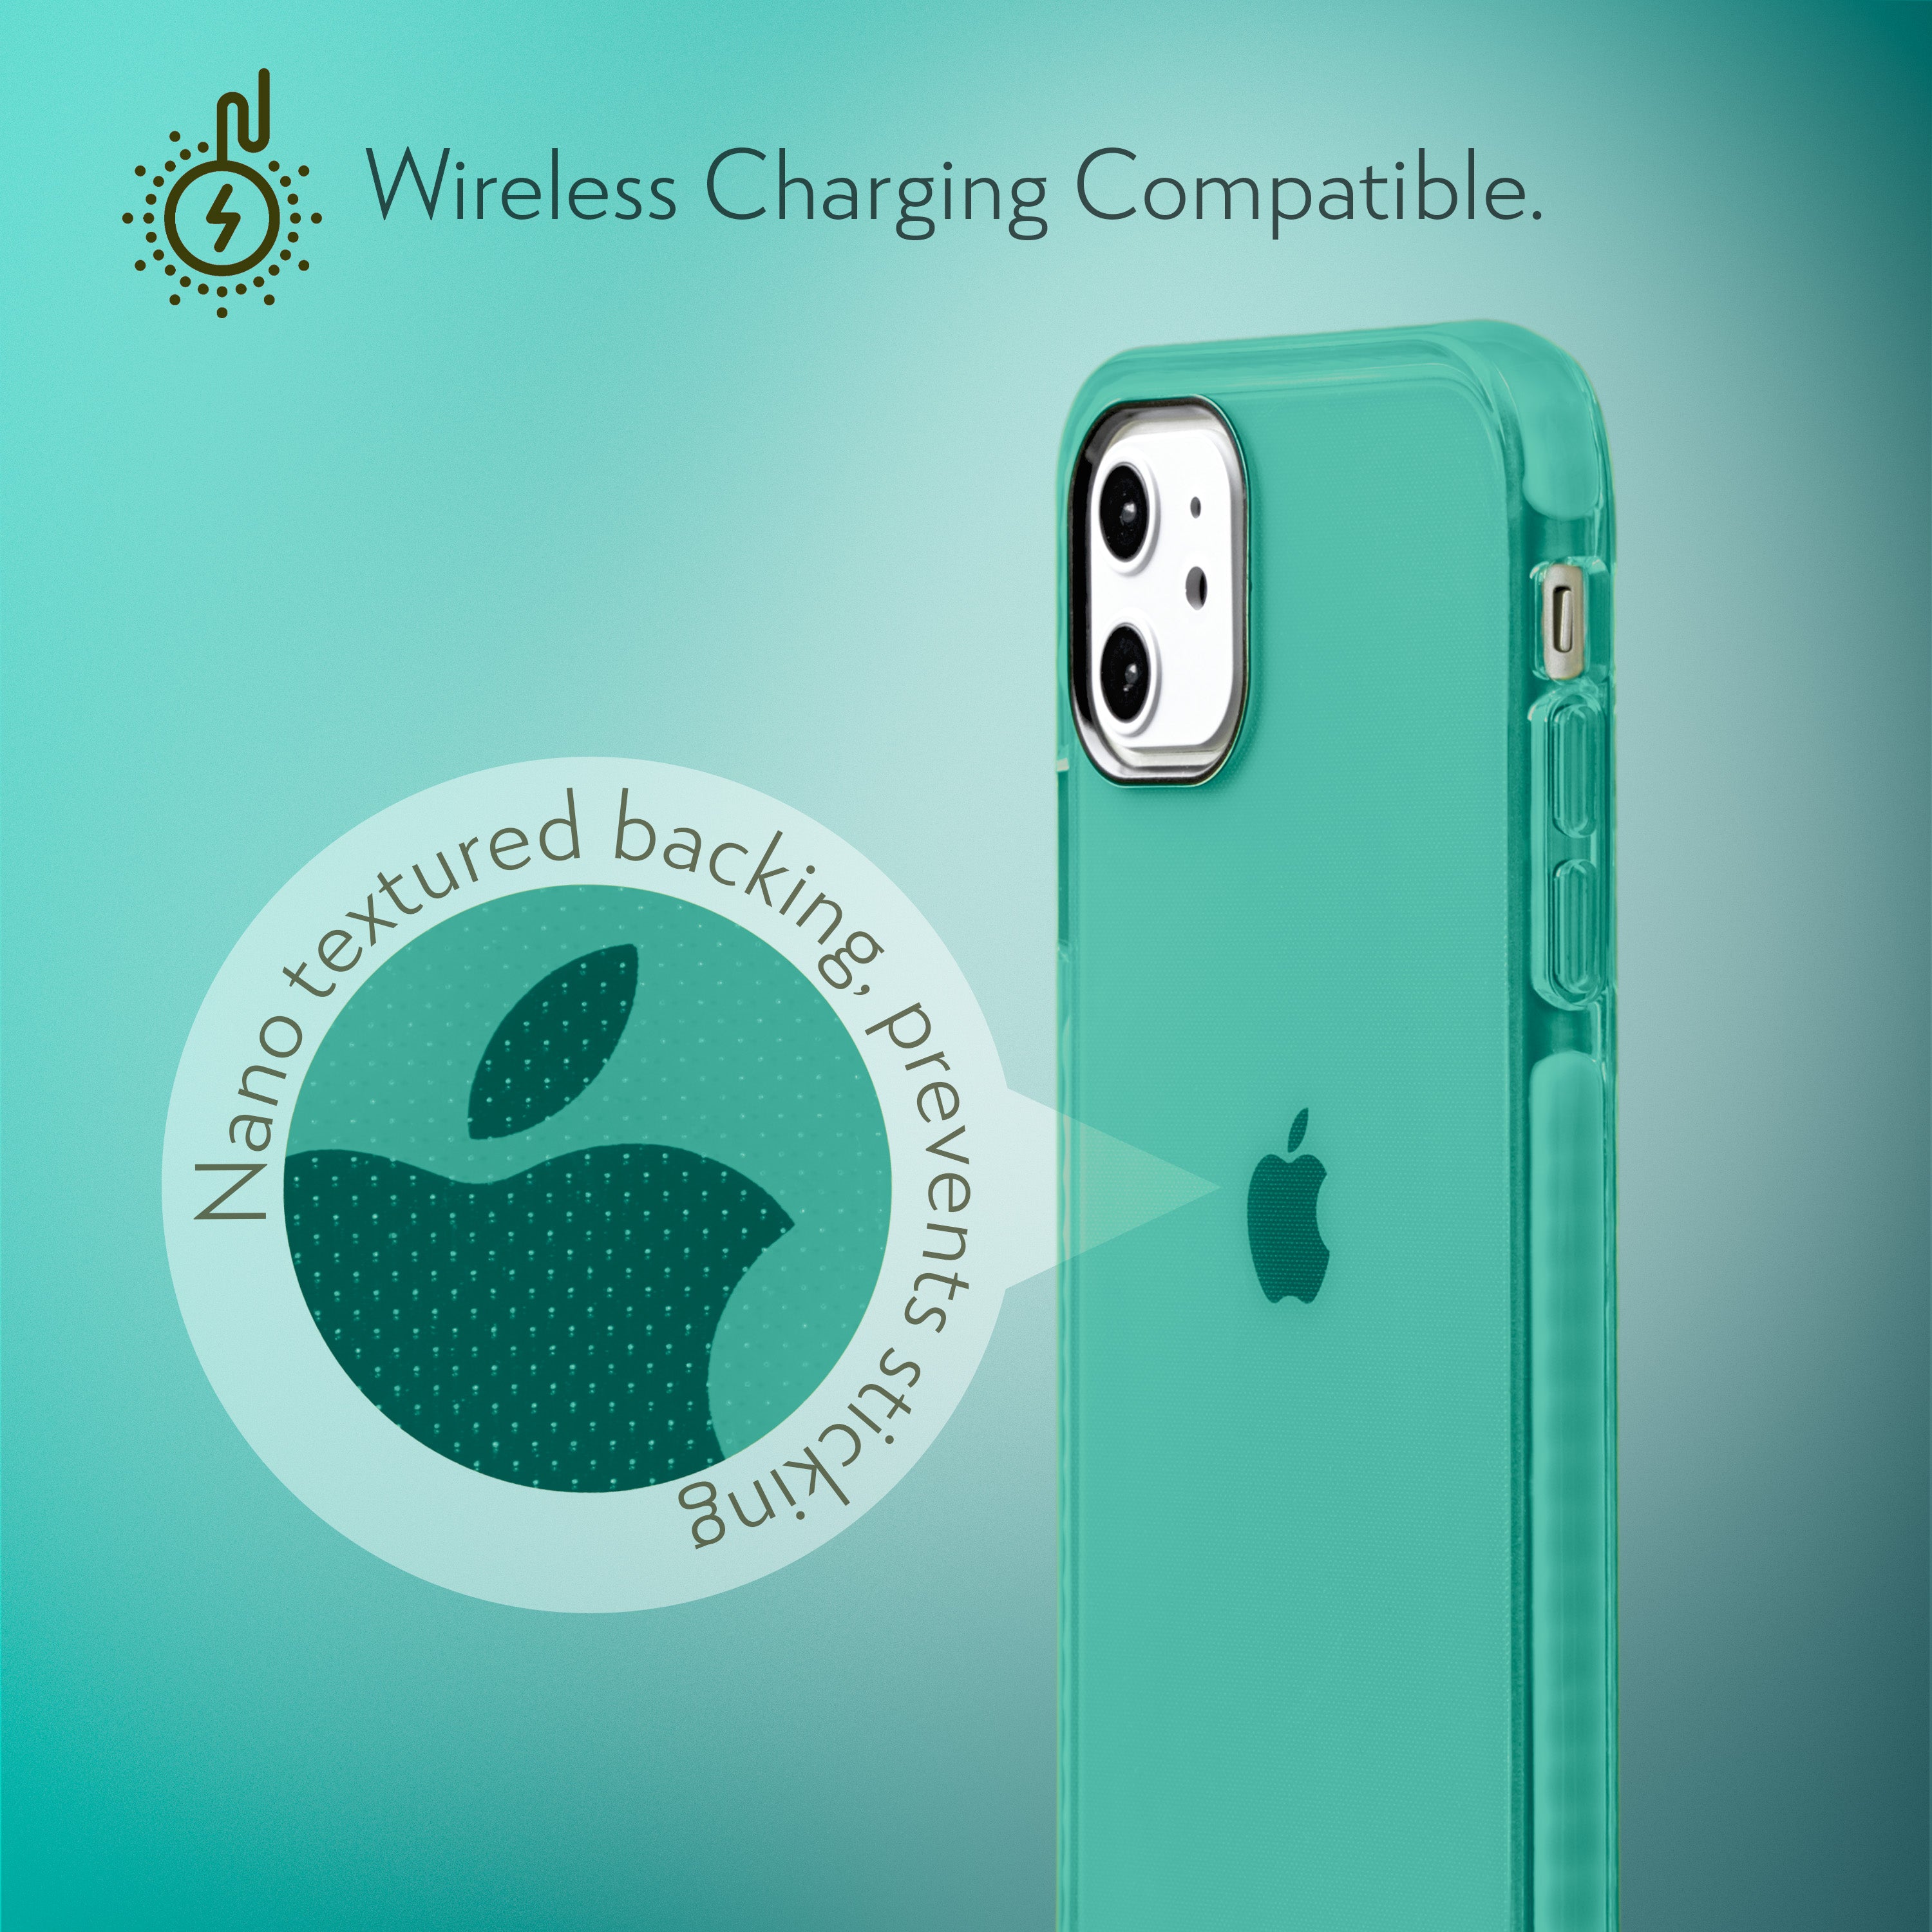 Barrier Case for iPhone 11 - Polished Turquoise Blue